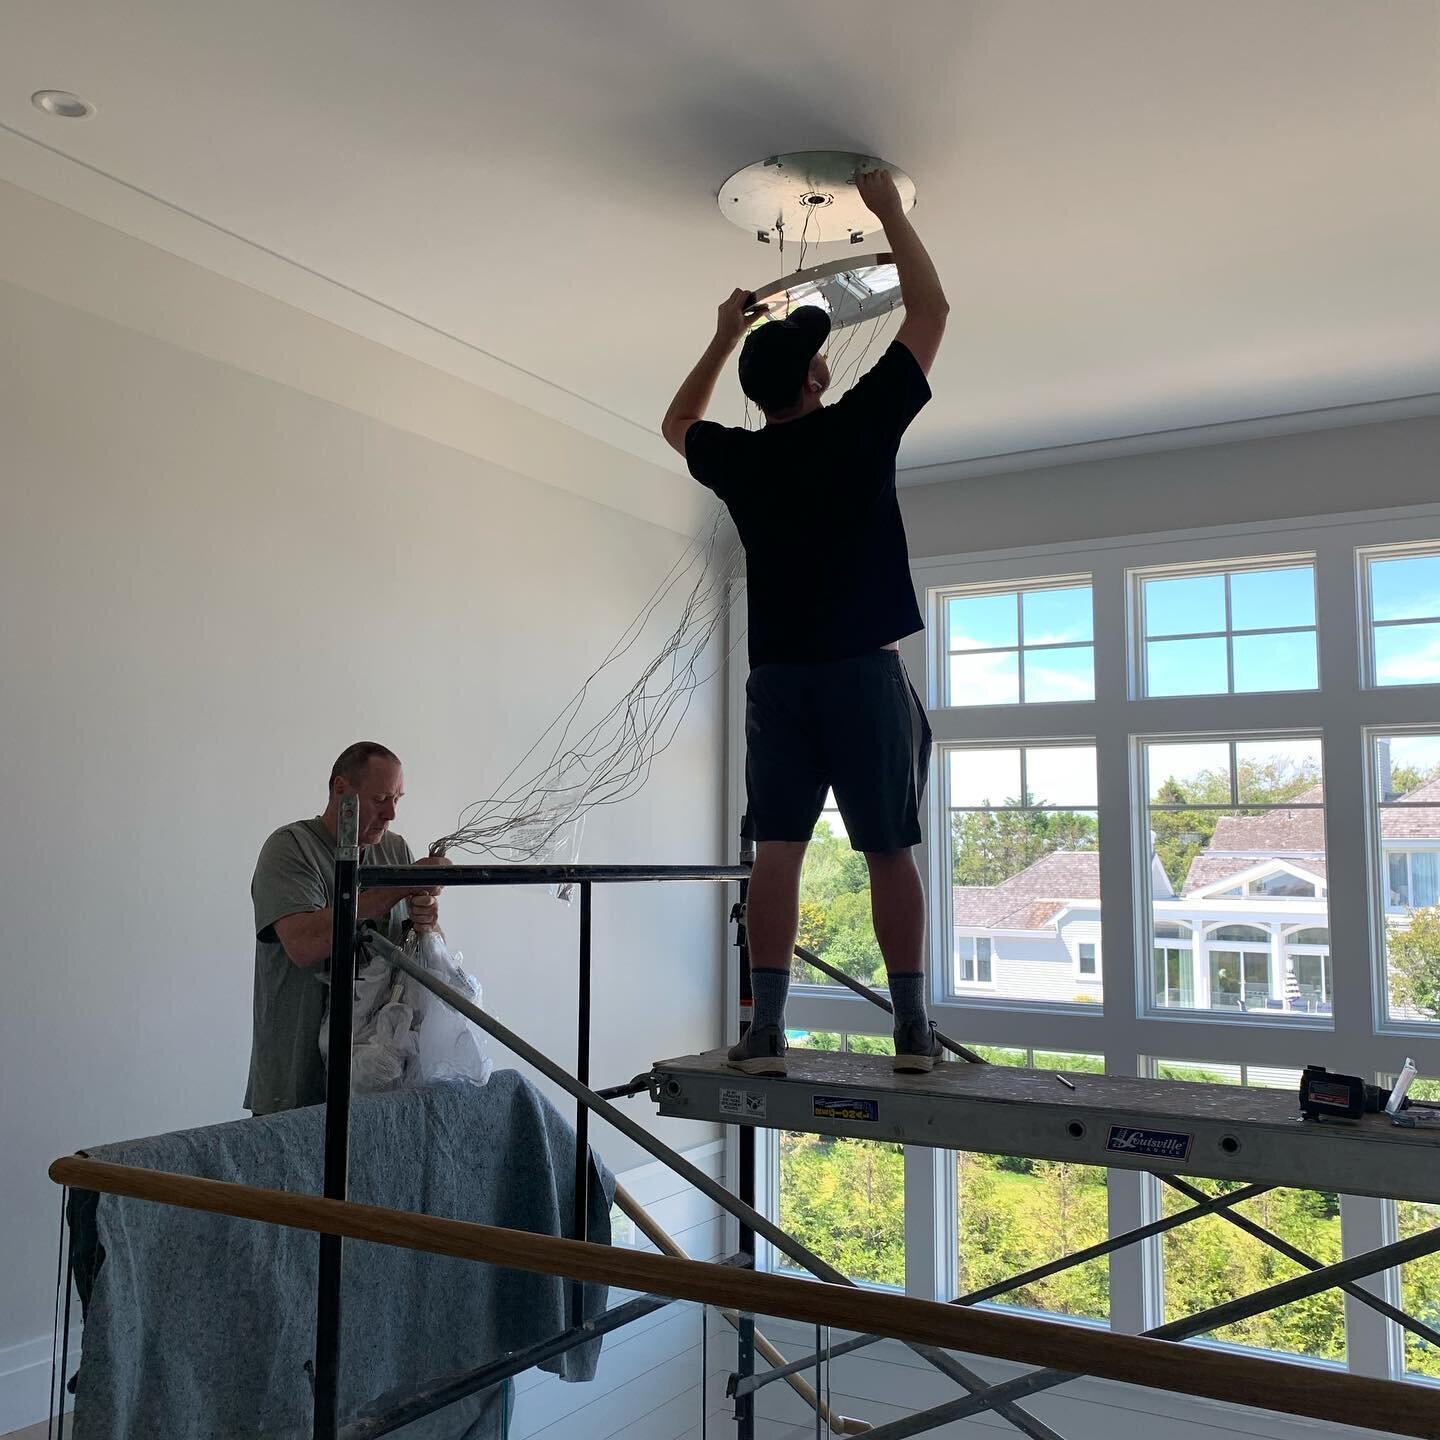 Second story light fixture installation can be nerve-racking but this one was worth it! #lightingisart #styledandsold #luxuryhomedesign #hamptonsdesigner #c2rconstruction #waterfronthomes